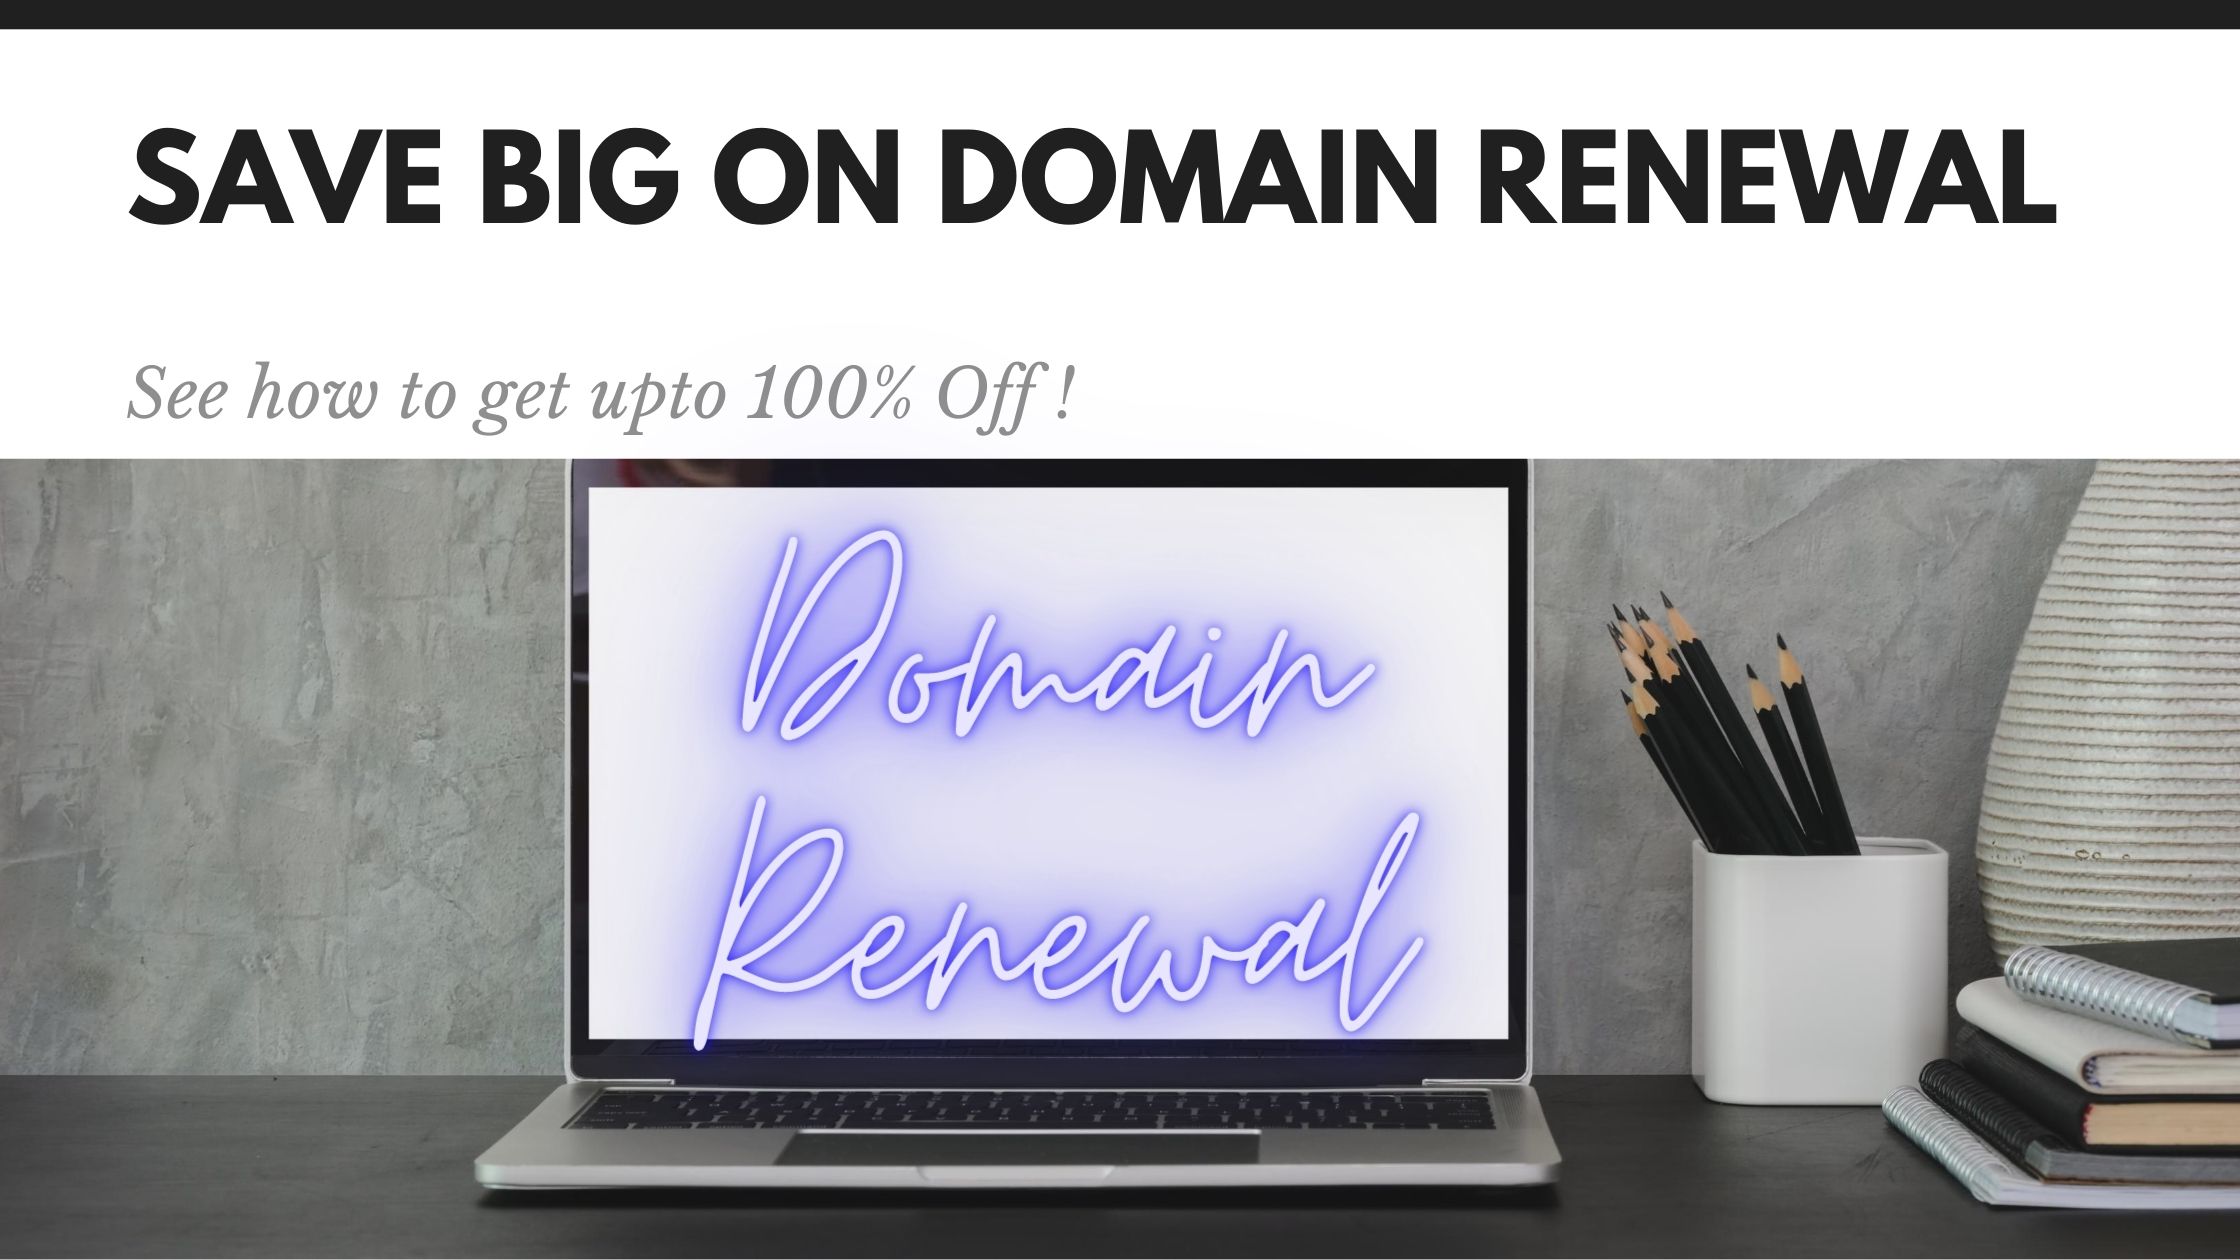 Renew a Domain with Free WhoisGuard, Upto 100% Off, Domain Renewal coupons and discounts